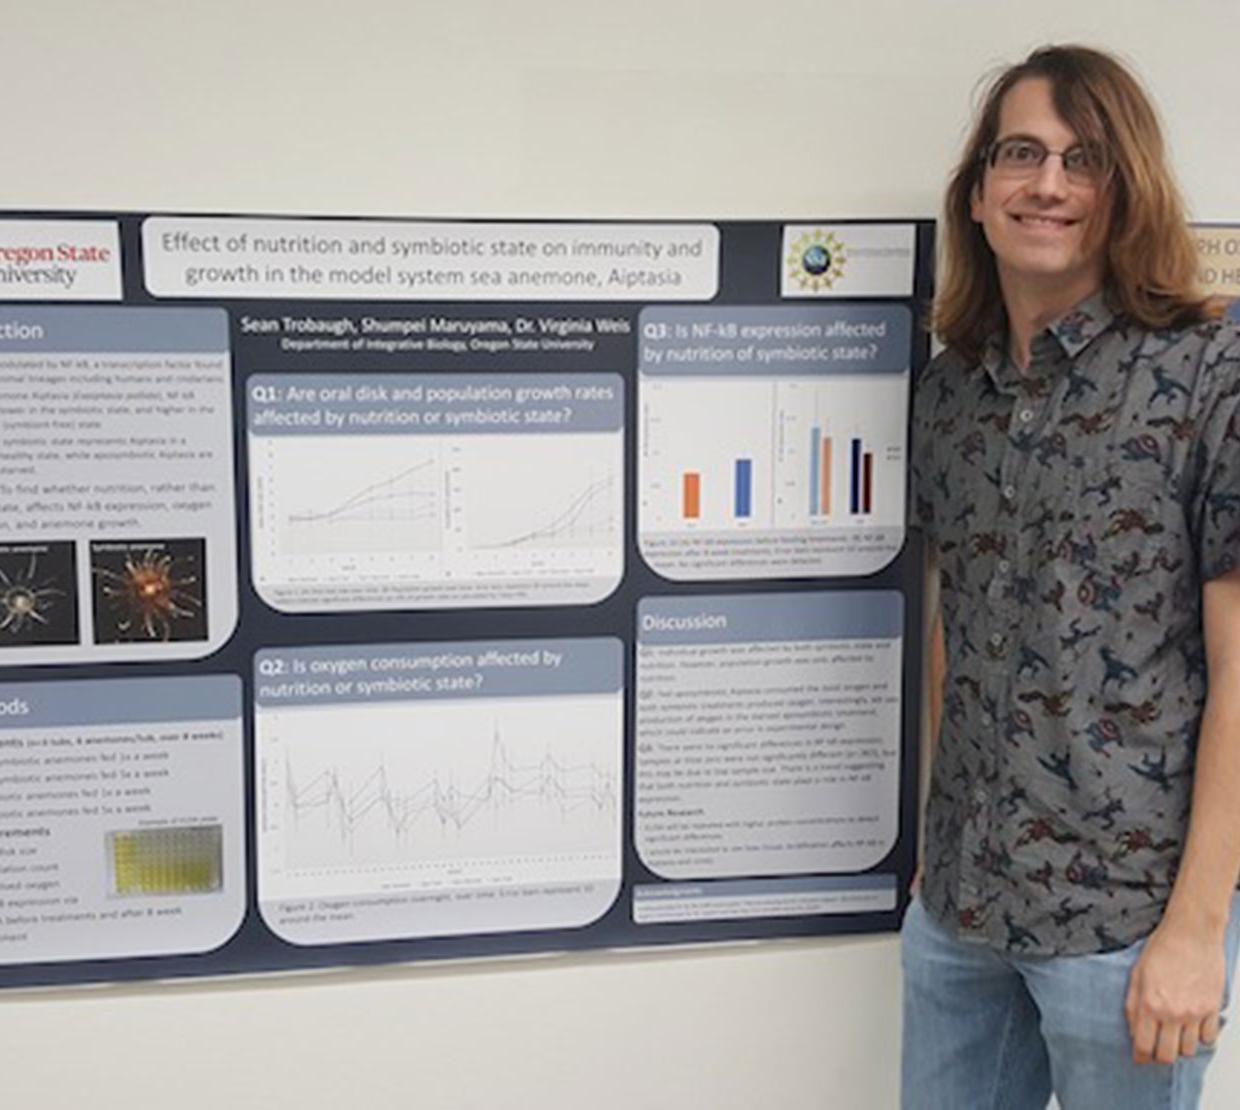 Sean Trobaugh in front of research poster